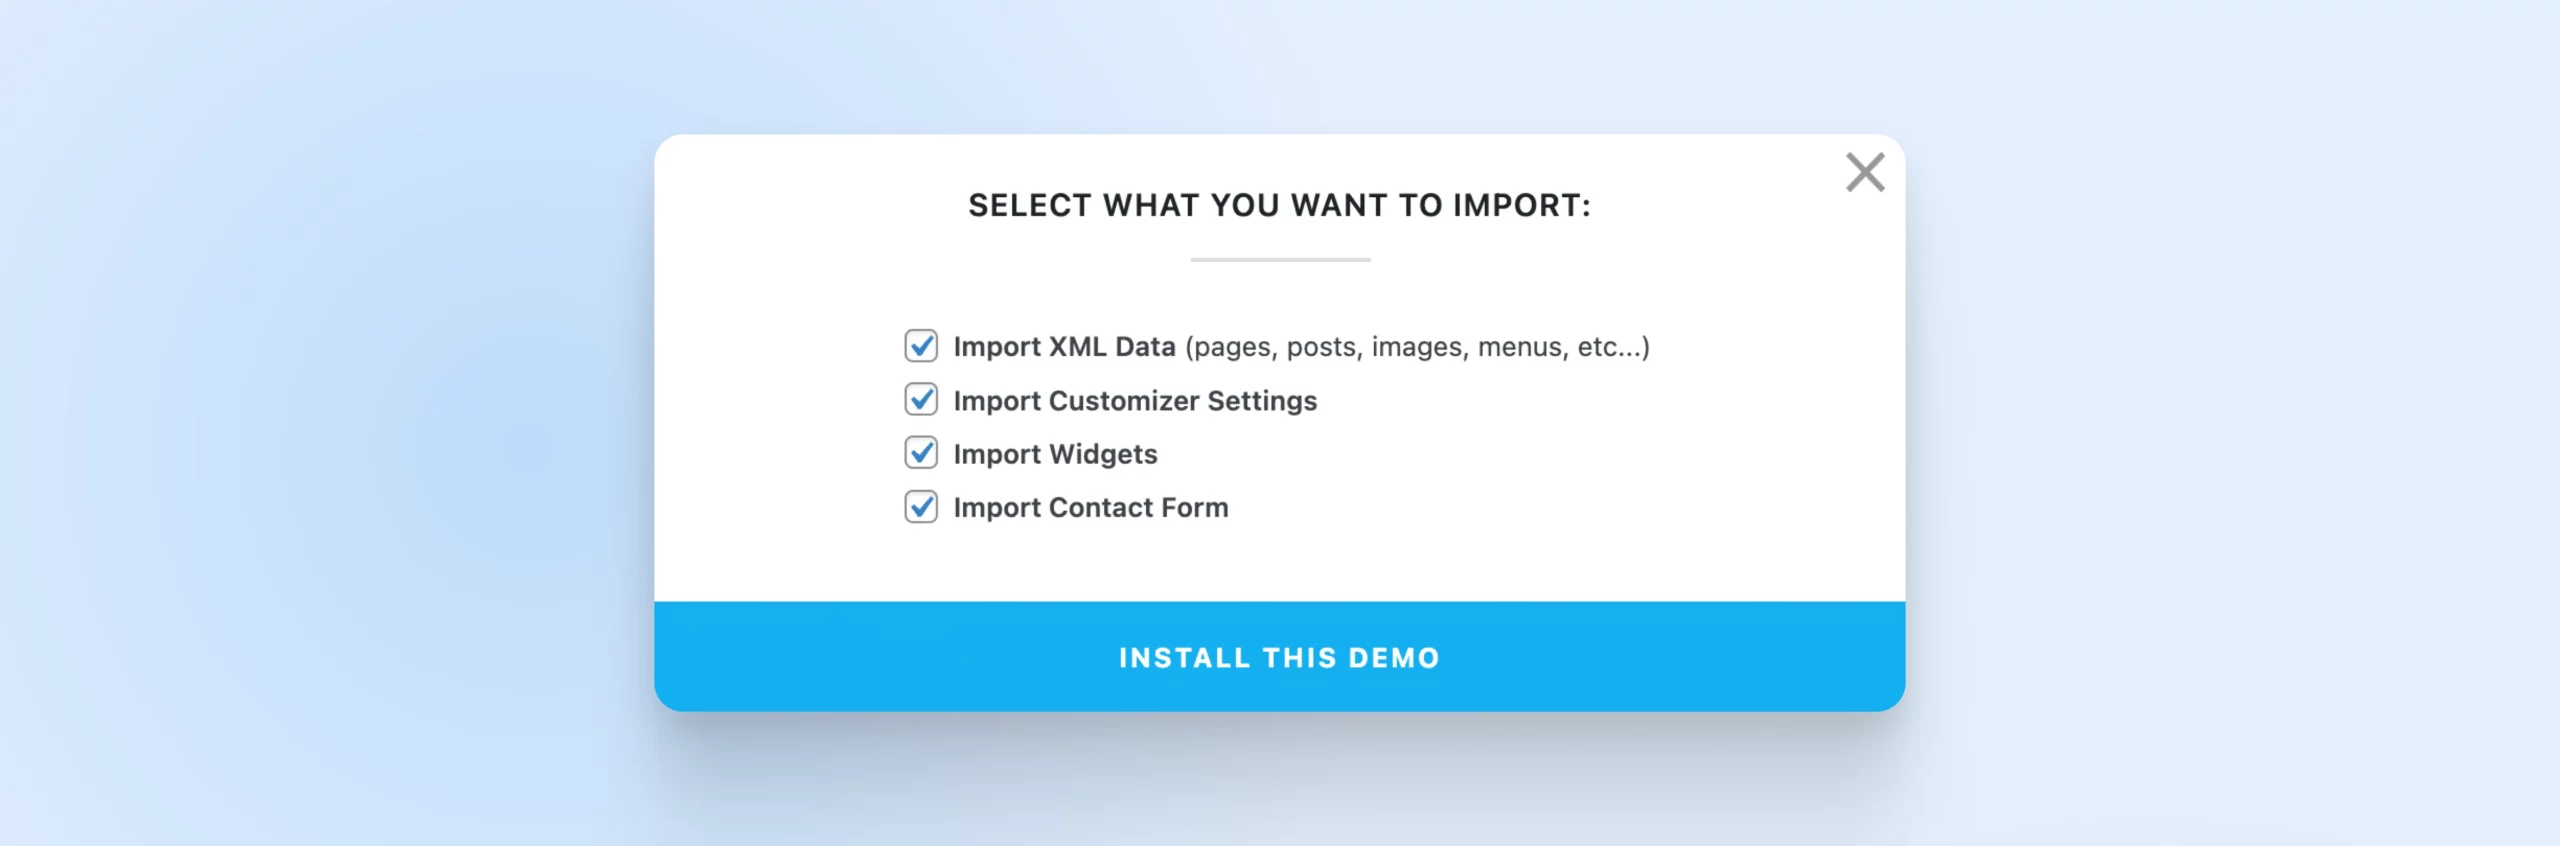 A list of options to import including widgets and contact form, all check-marked. Button to INSTALL THE DEMO.